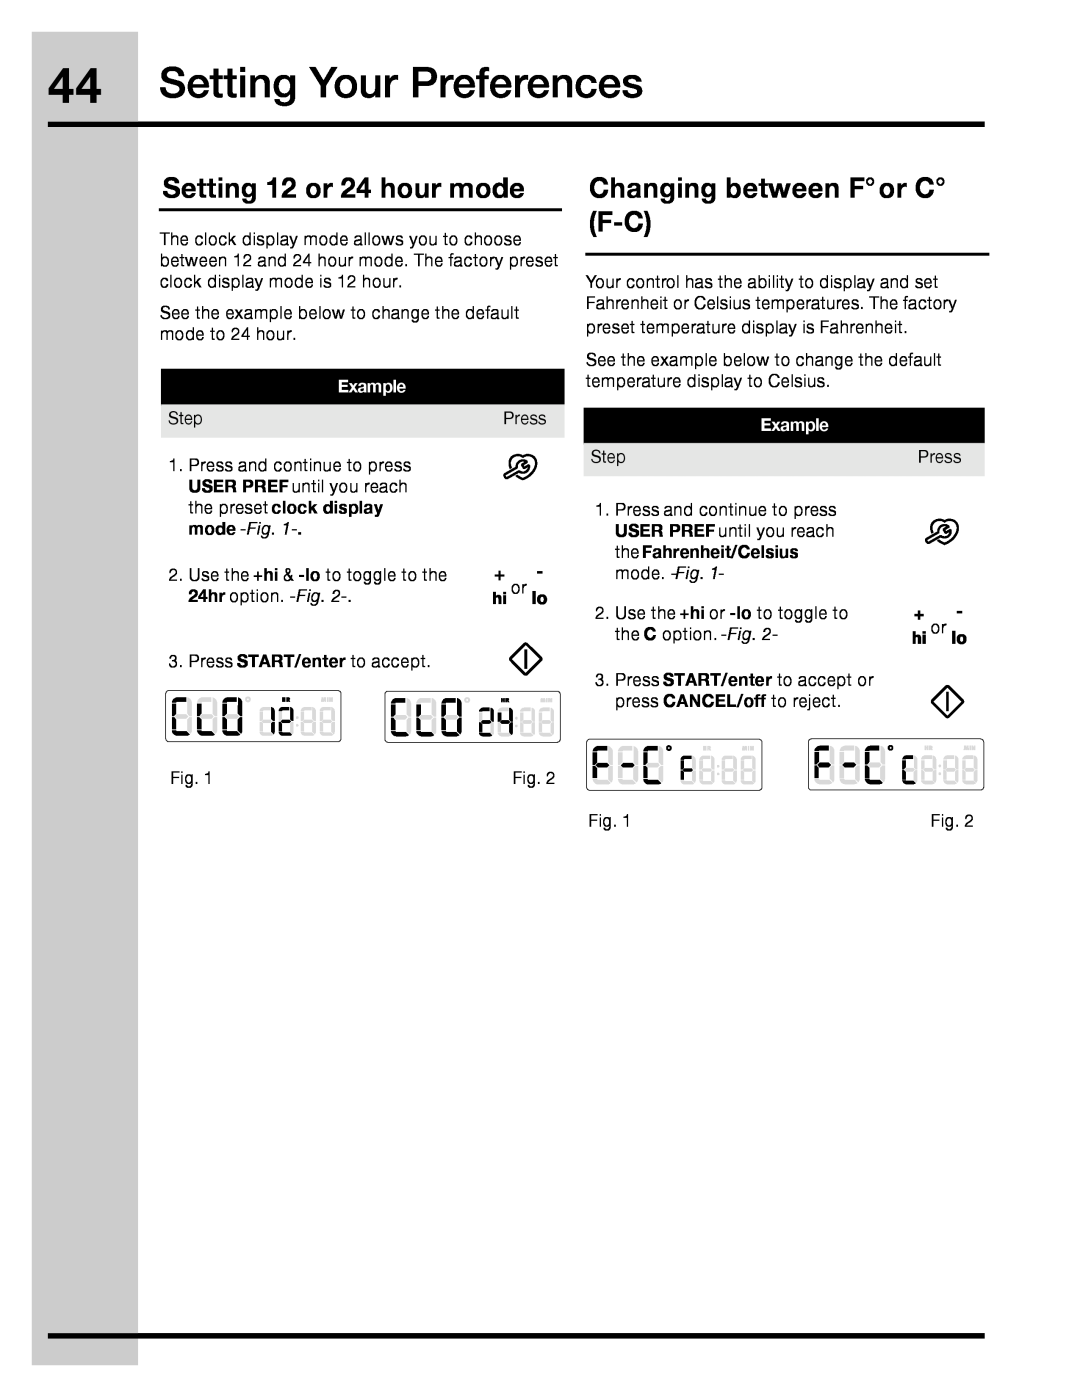 Electrolux 316471113 Setting Your Preferences, Setting 12 or 24 hour mode, Changing between For C F-C, 24hr option. -Fig 